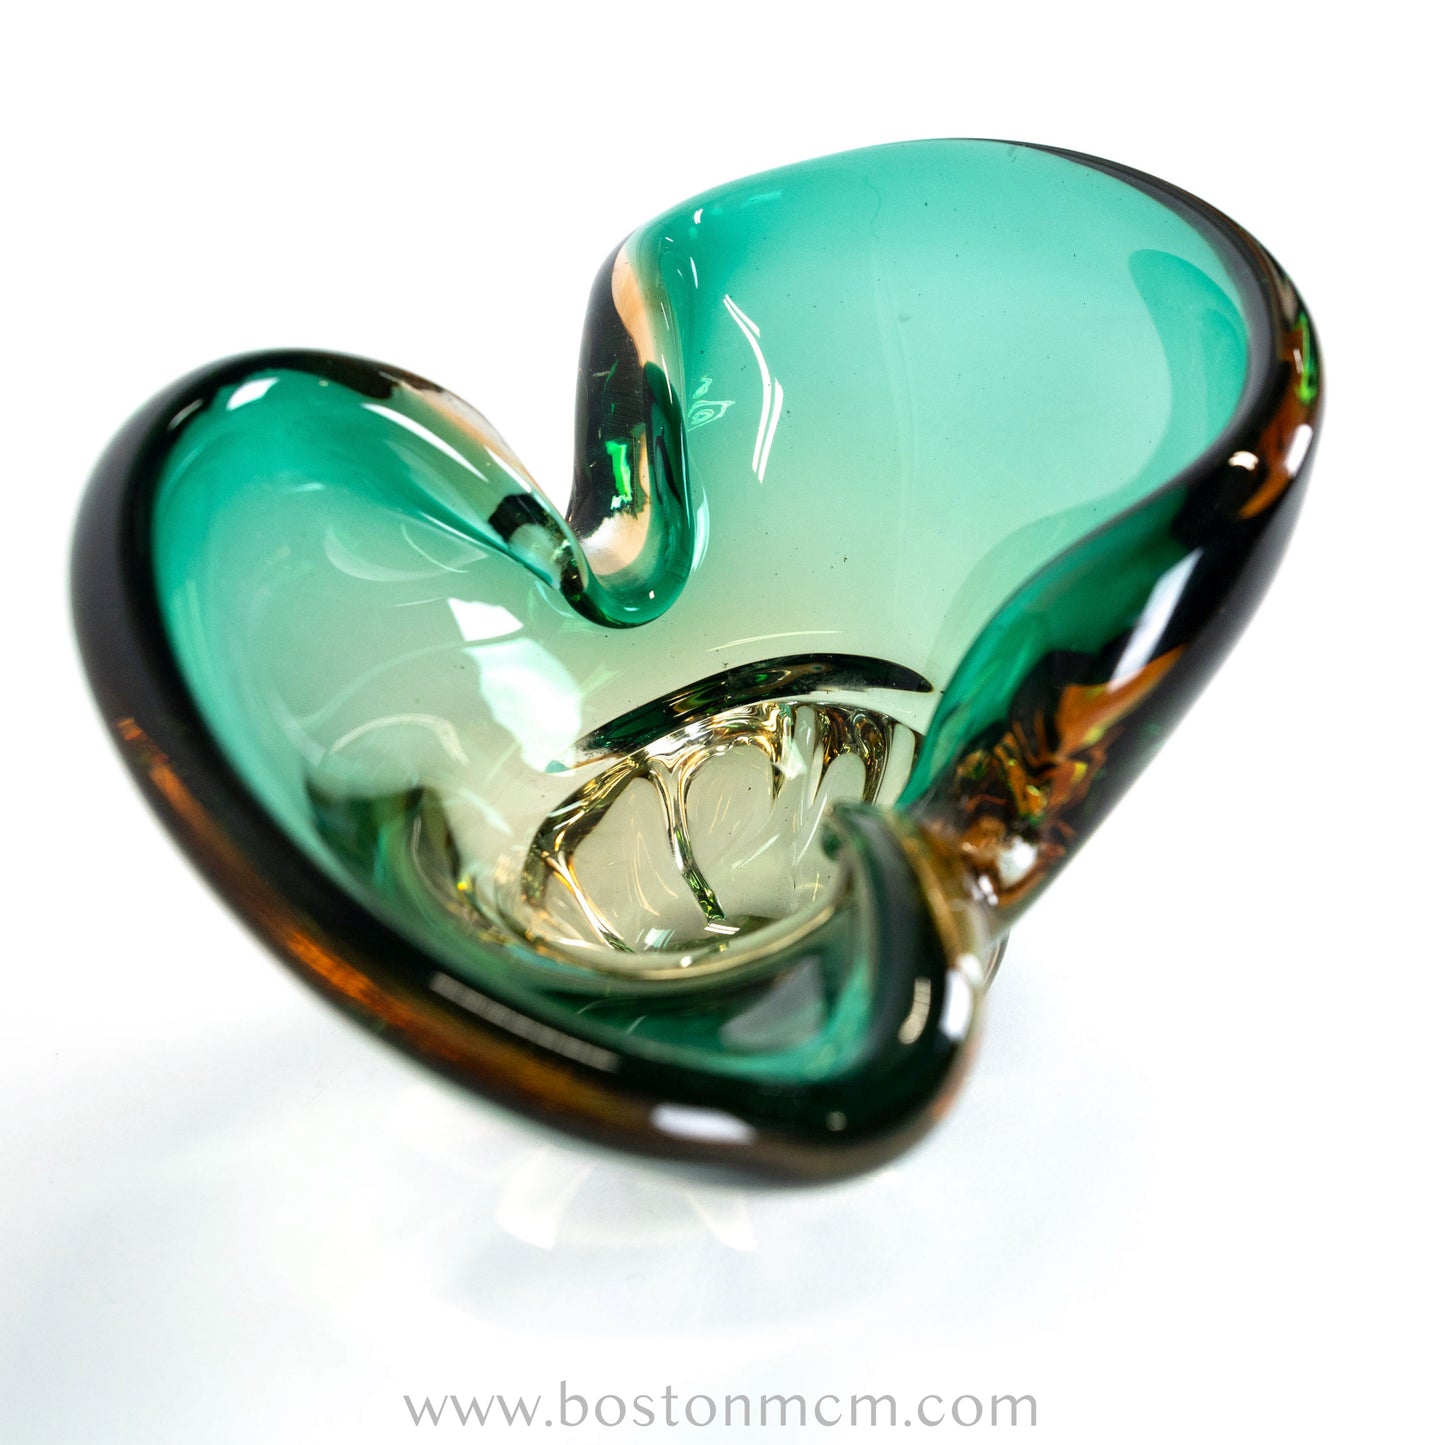 Italian Murano Art Glass Bowl, Possibly Sommerso